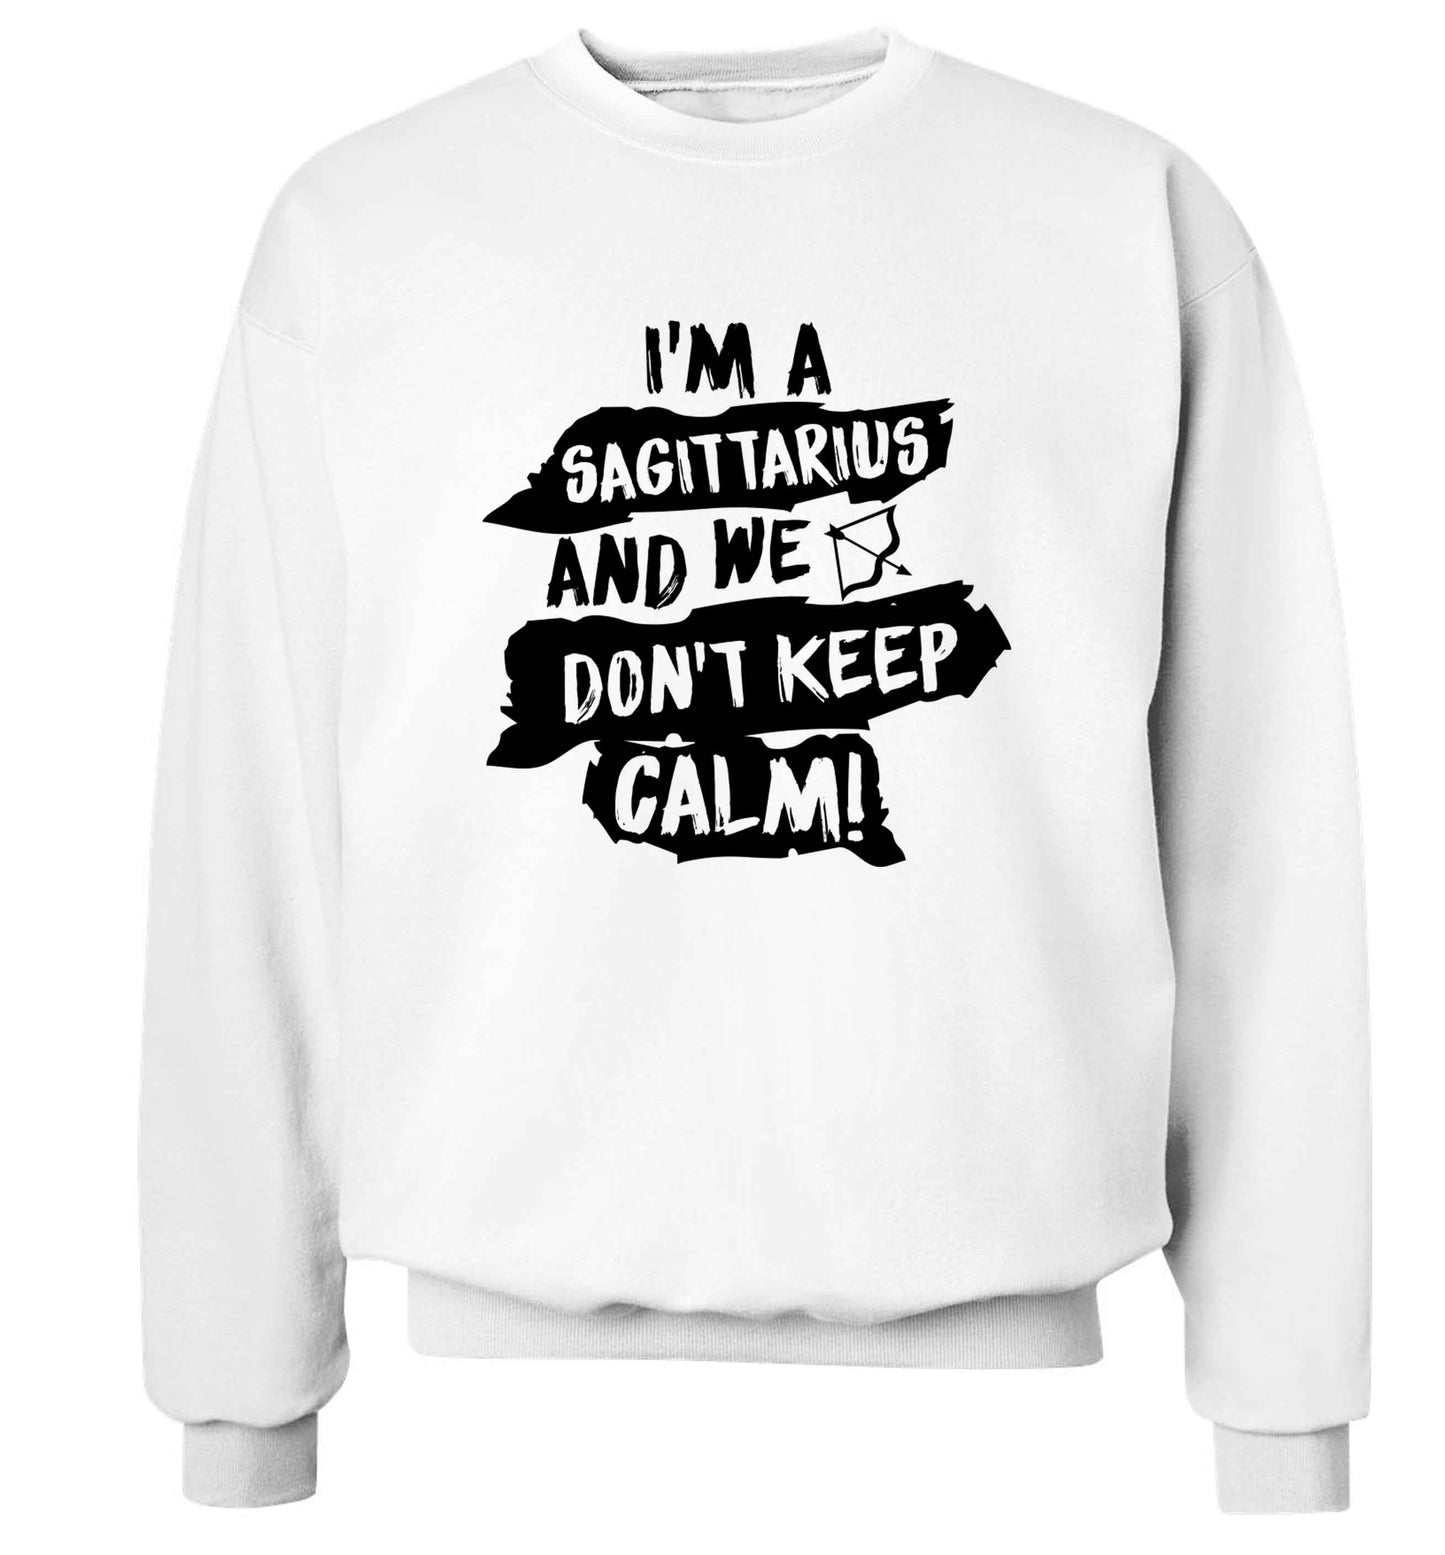 I'm a sagittarius and we don't keep calm Adult's unisex white Sweater 2XL